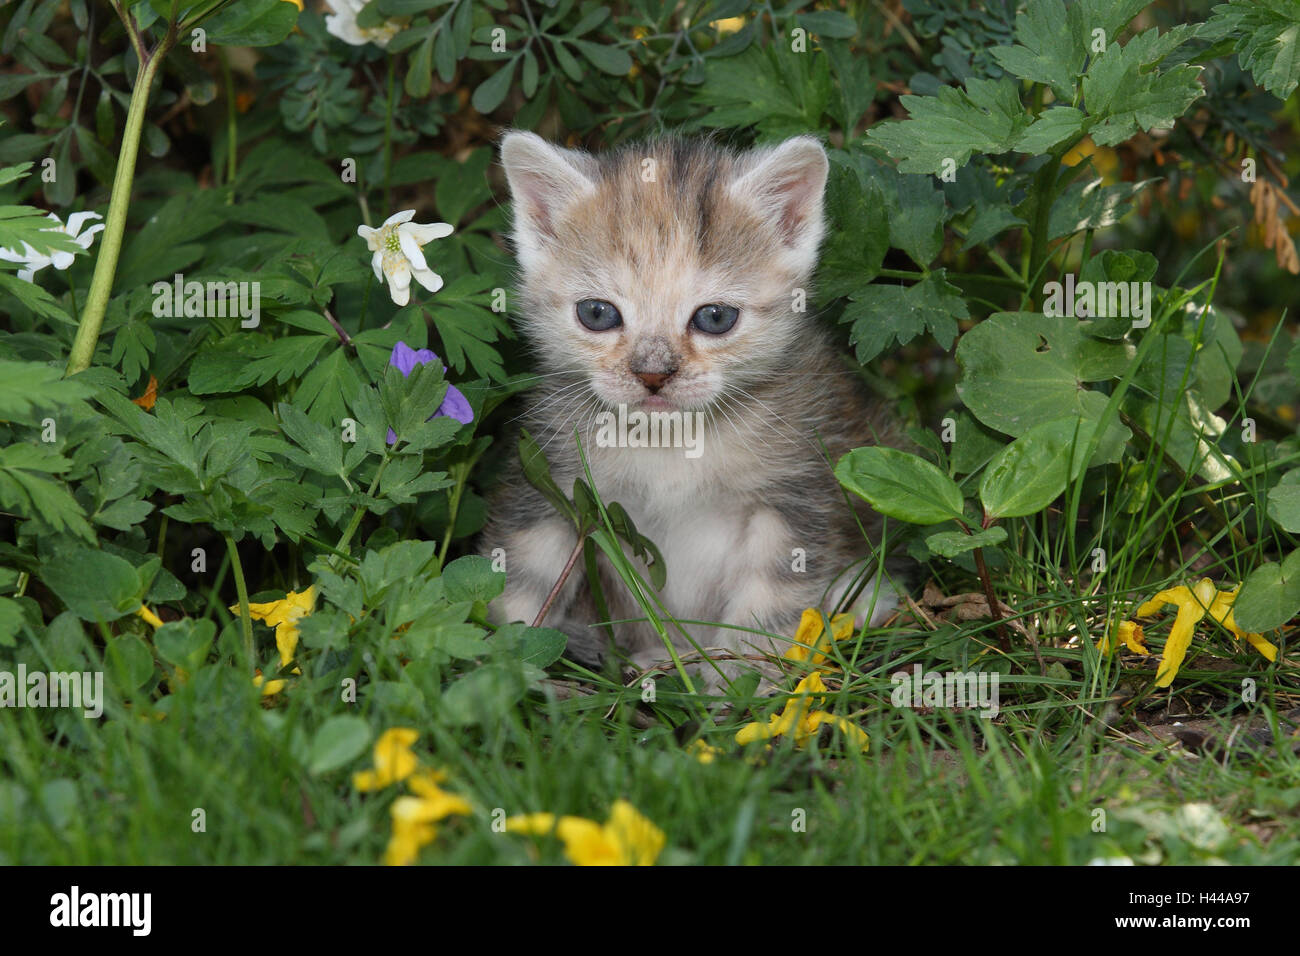 Cat, young, sit, meadow, garden, animals, mammals, pets, small cats, Felidae, domesticates, house cat, young animal, kitten, small, awkward, clumsy, helplessly, sweetly, play, curiosity, flowers, hervorschauen, plants, individually, alone, young animals, animal baby, nature, outside, Stock Photo